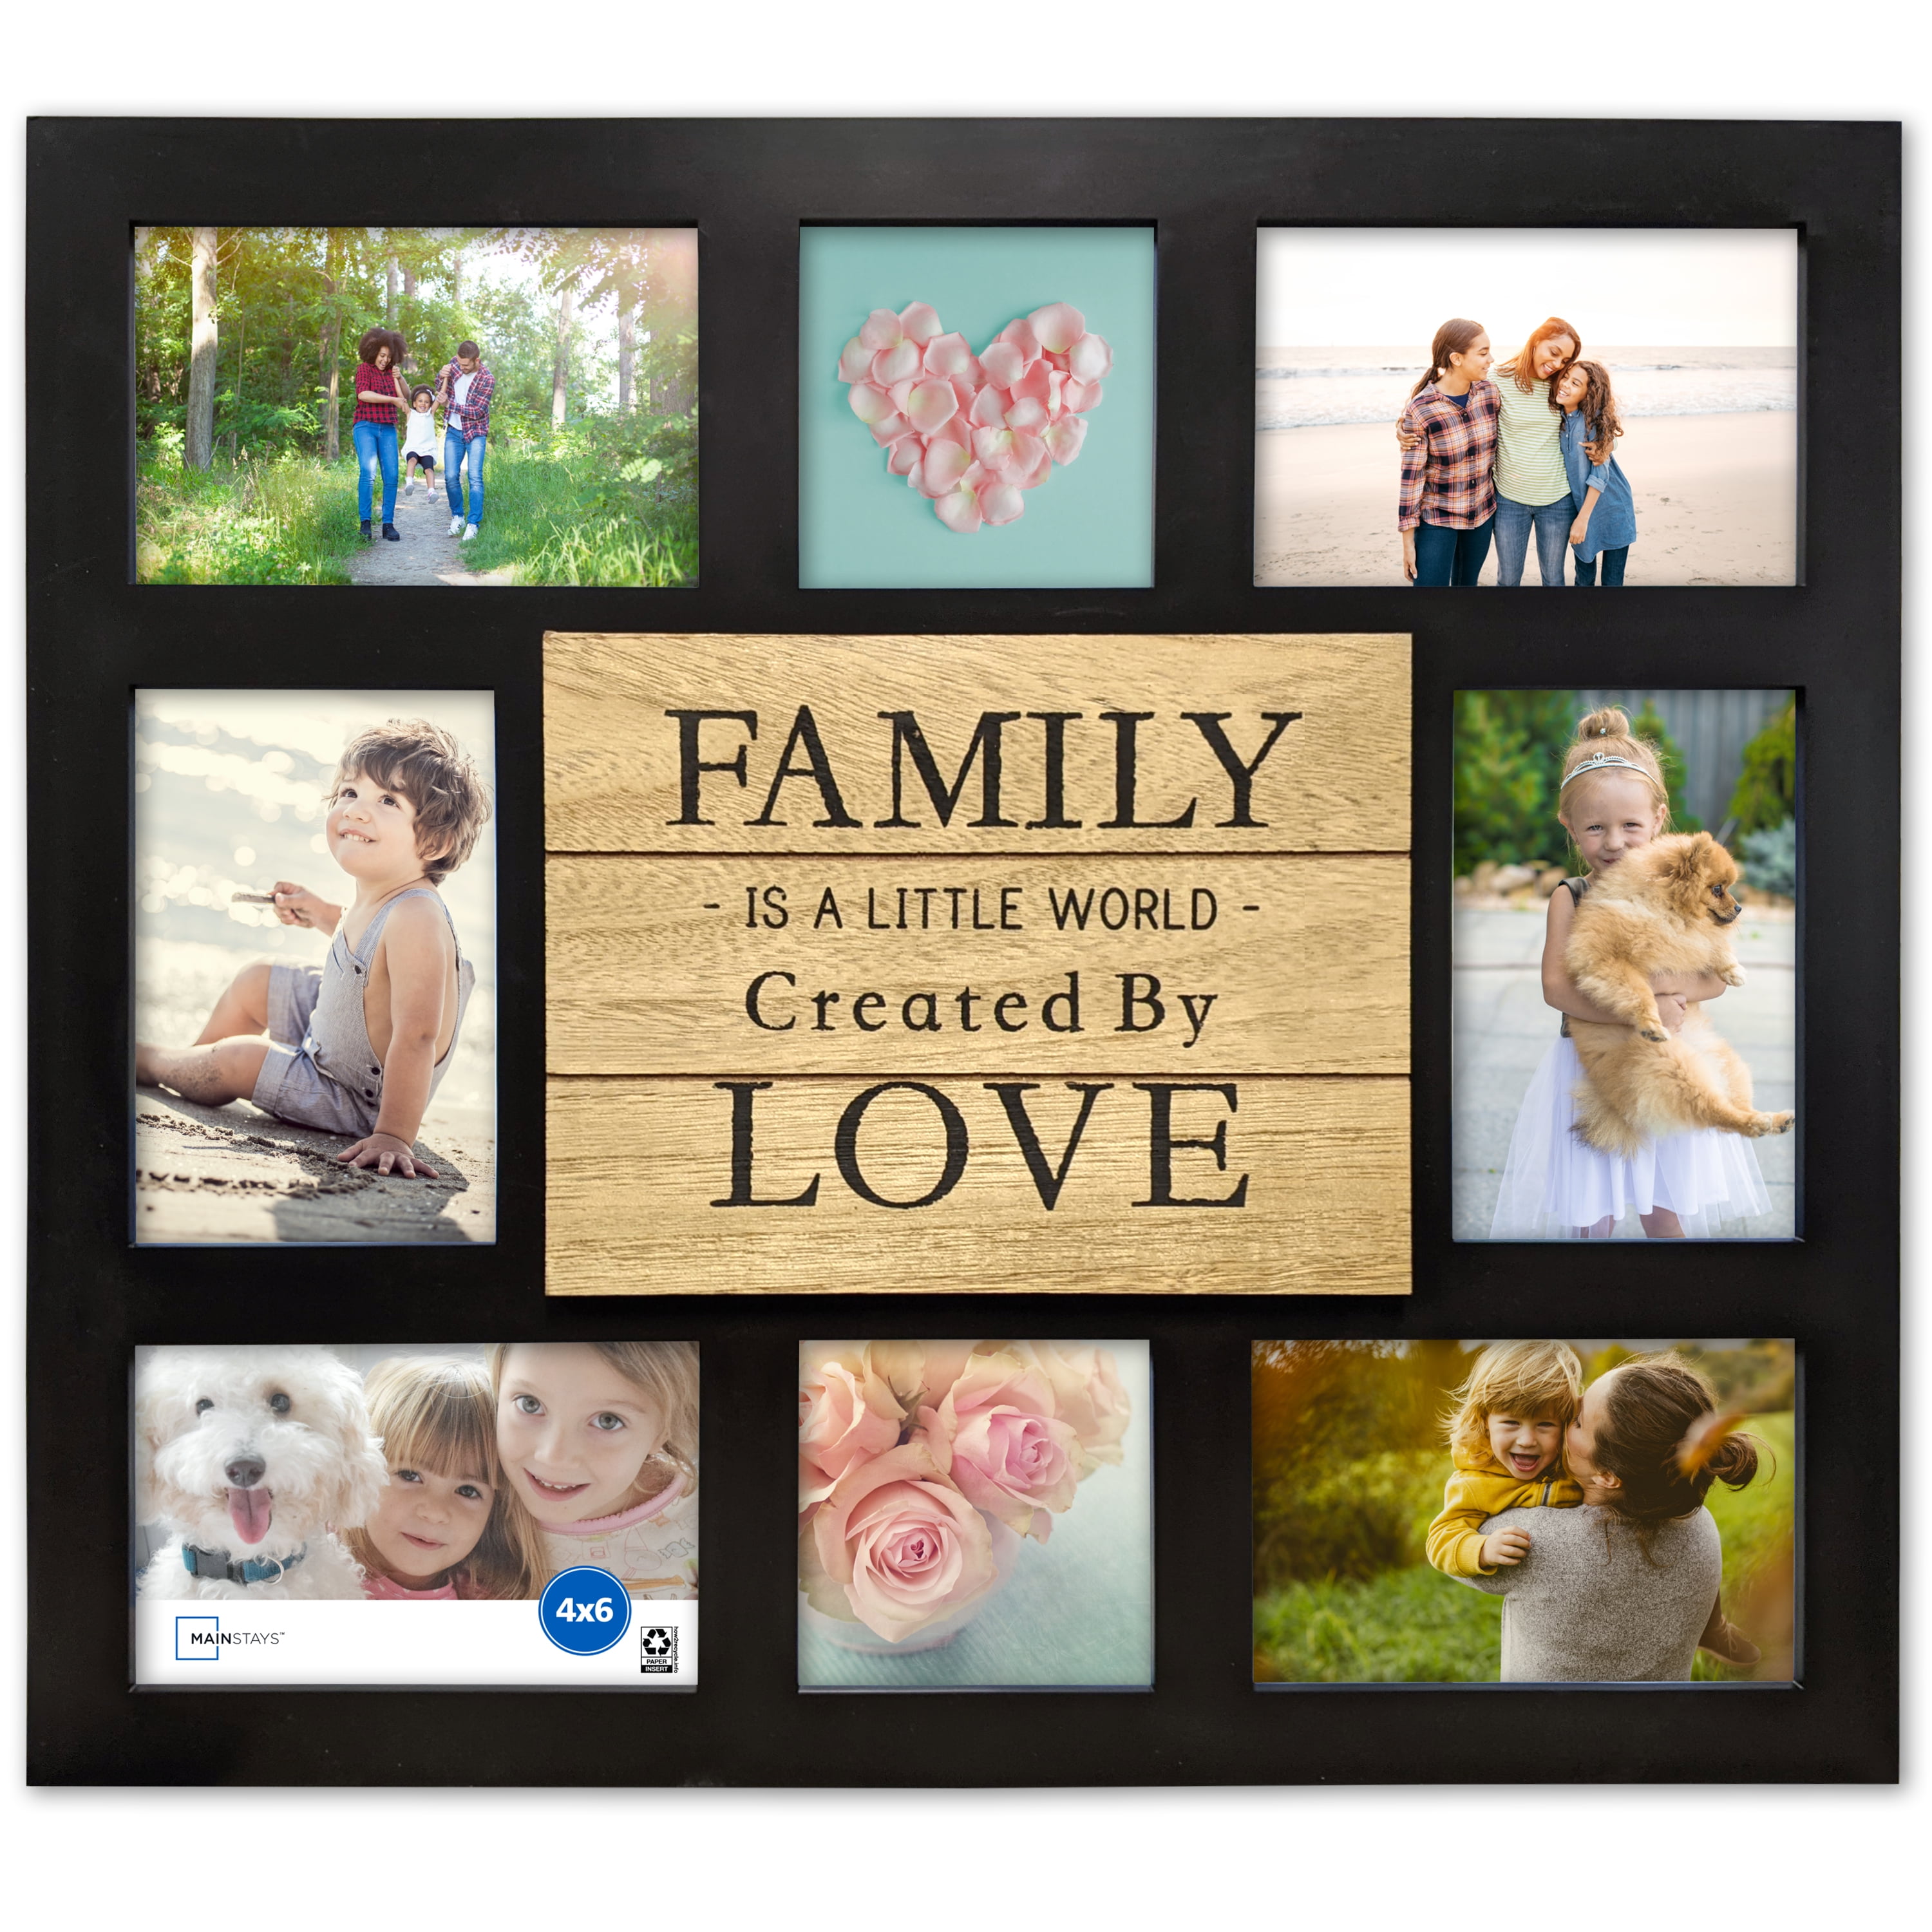 Details about   Wall Decor Mainstays 20" x 15" 8-Opening White Plank Collage Frame 4"x6” Photos 